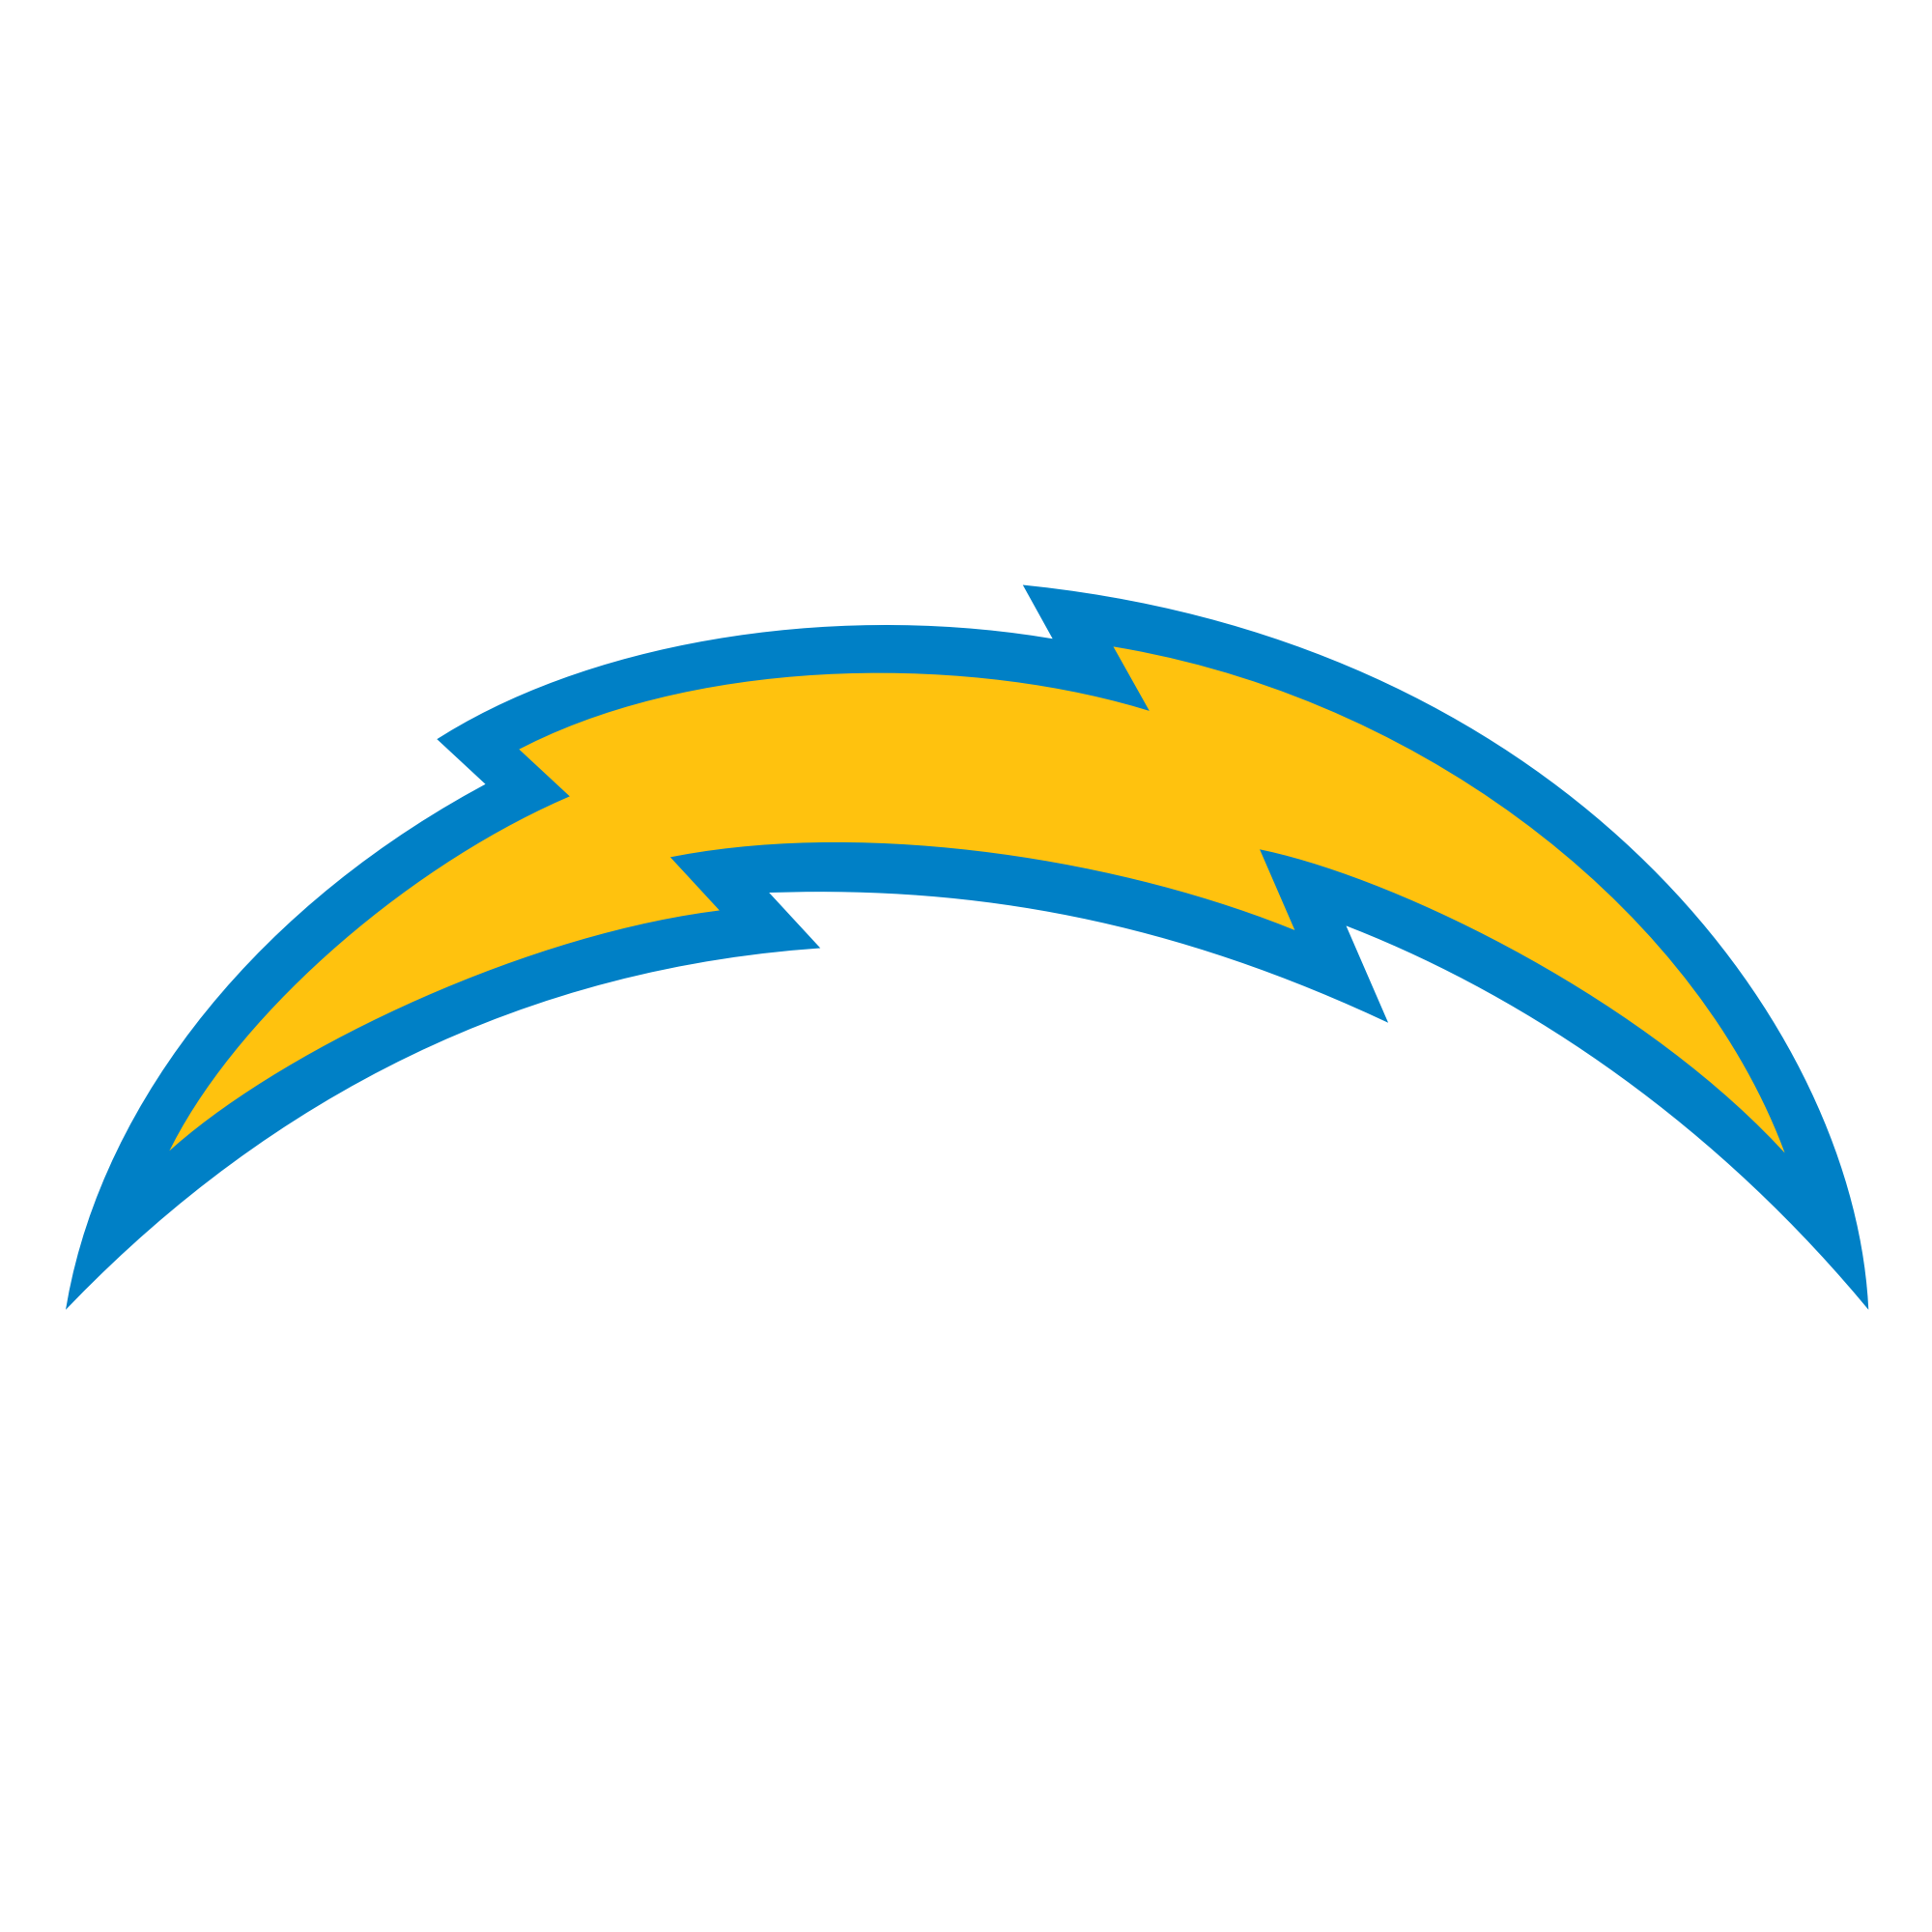 www.chargers.com